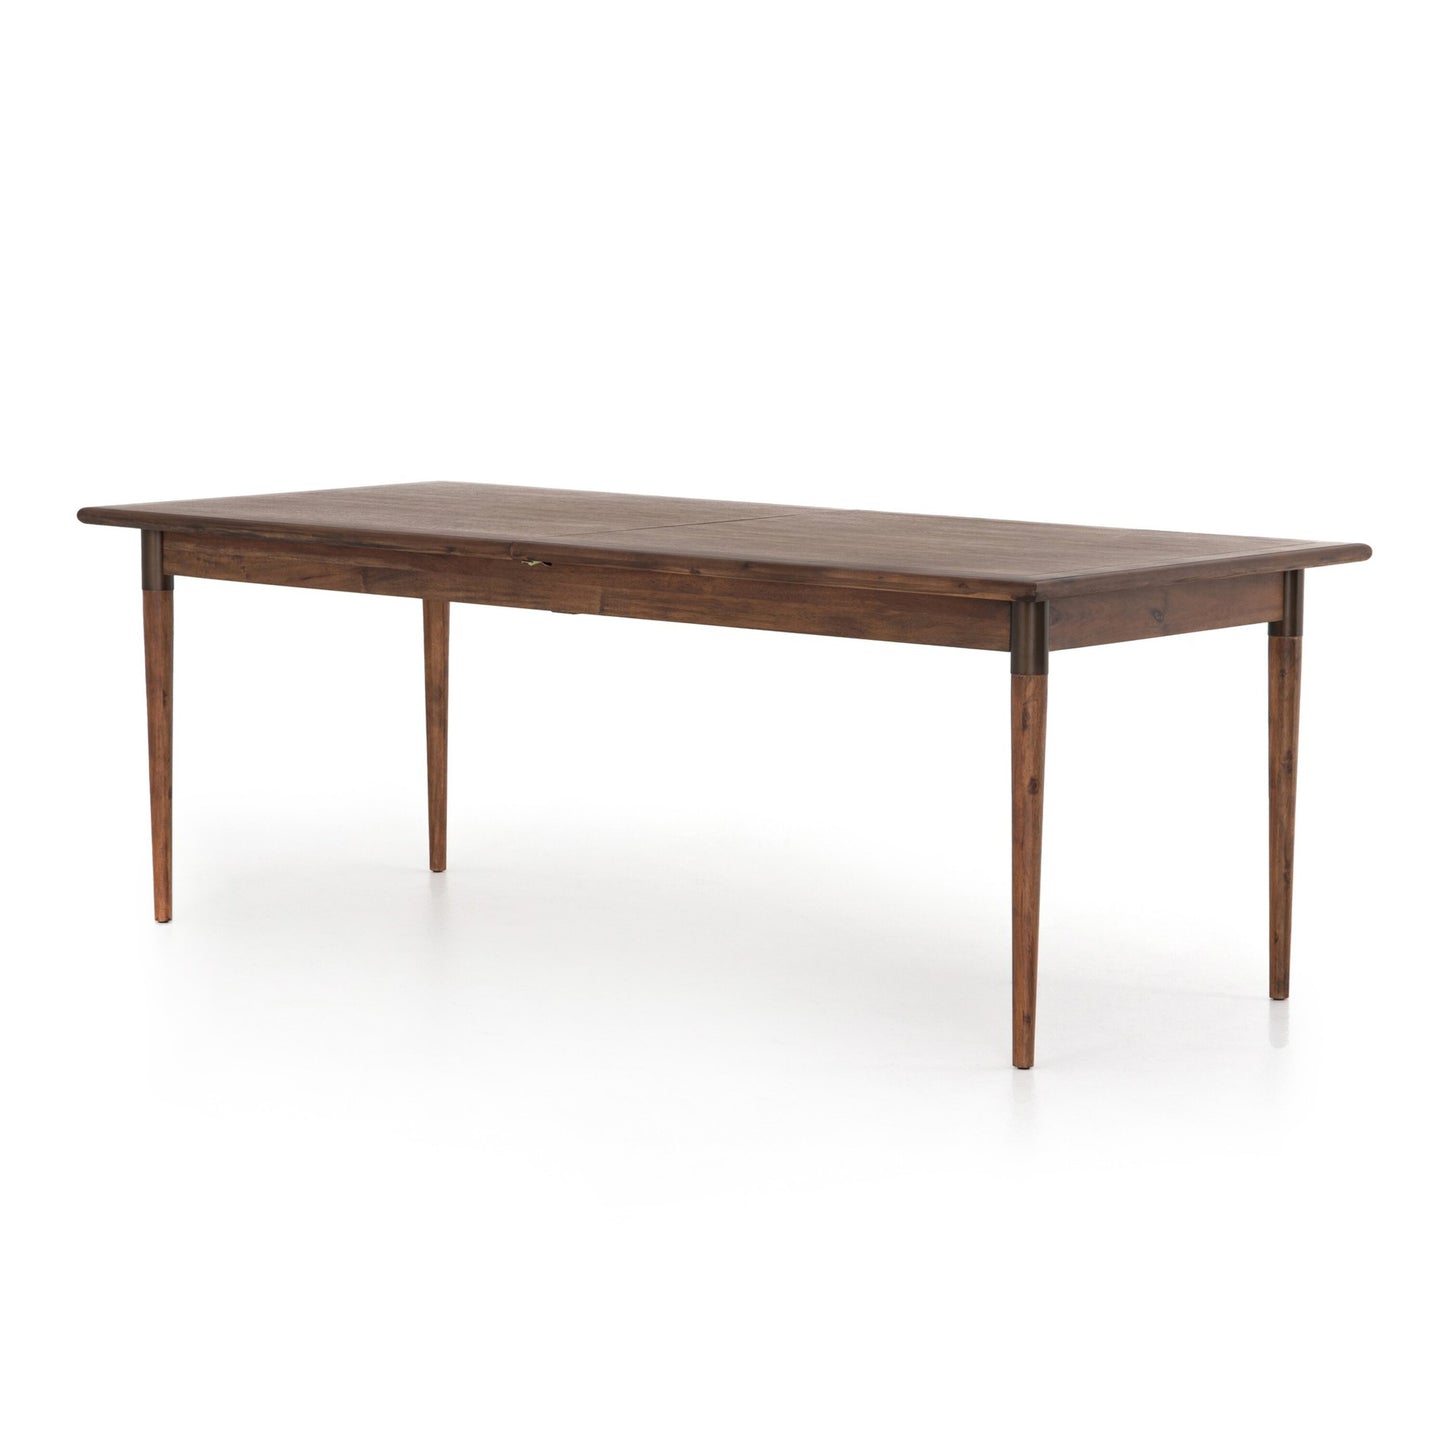 Harper extension dining table-84/104"